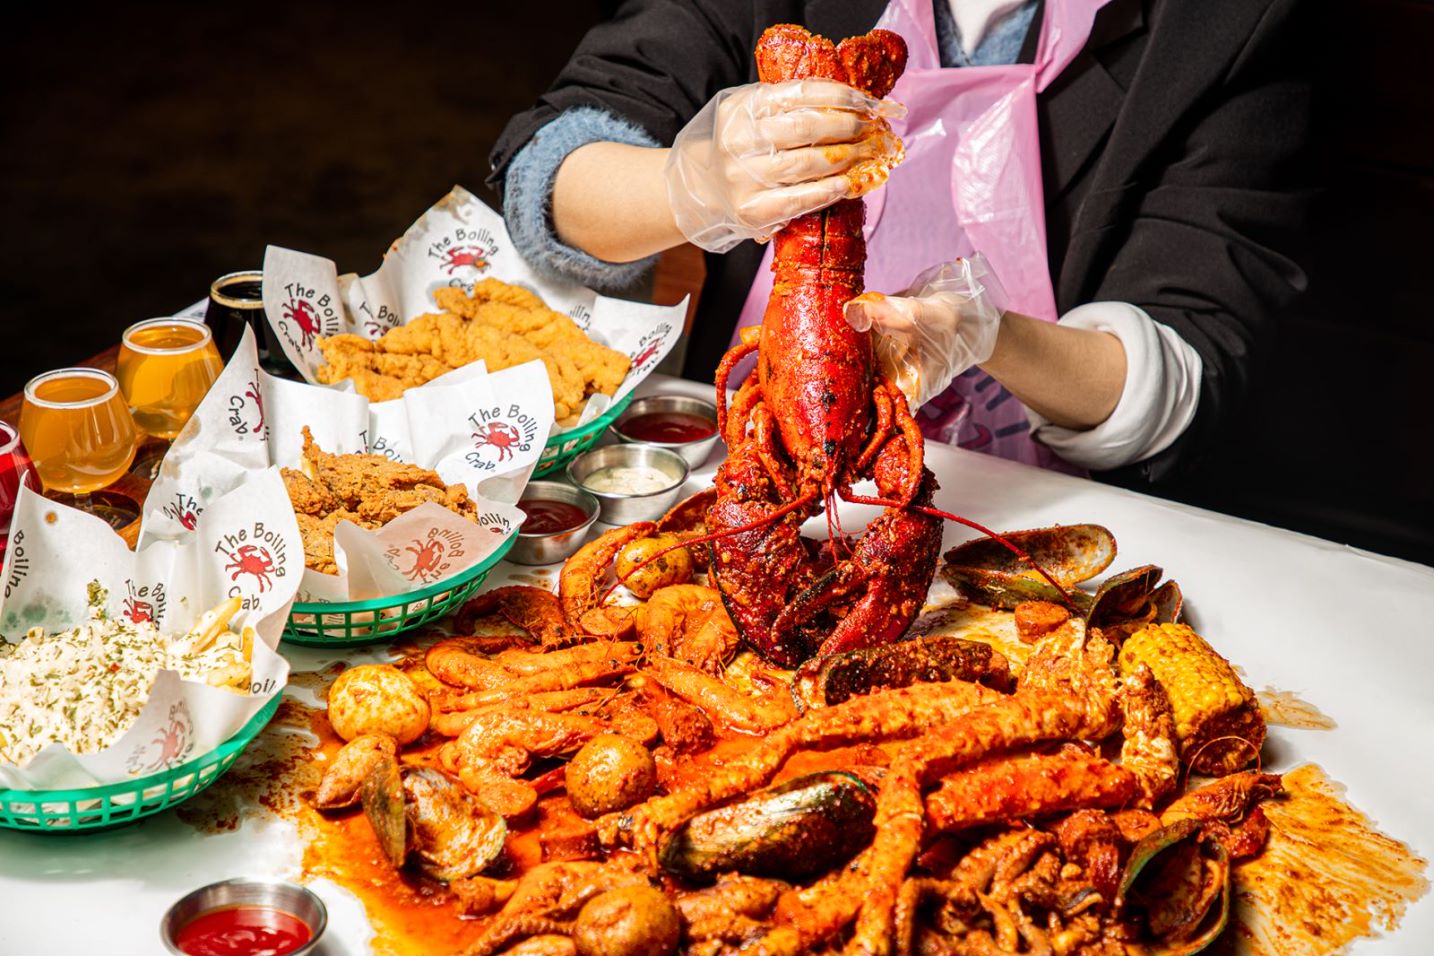 America's Favorite Seafood Restaurant The Boiling Crab Celebrates 20 Years